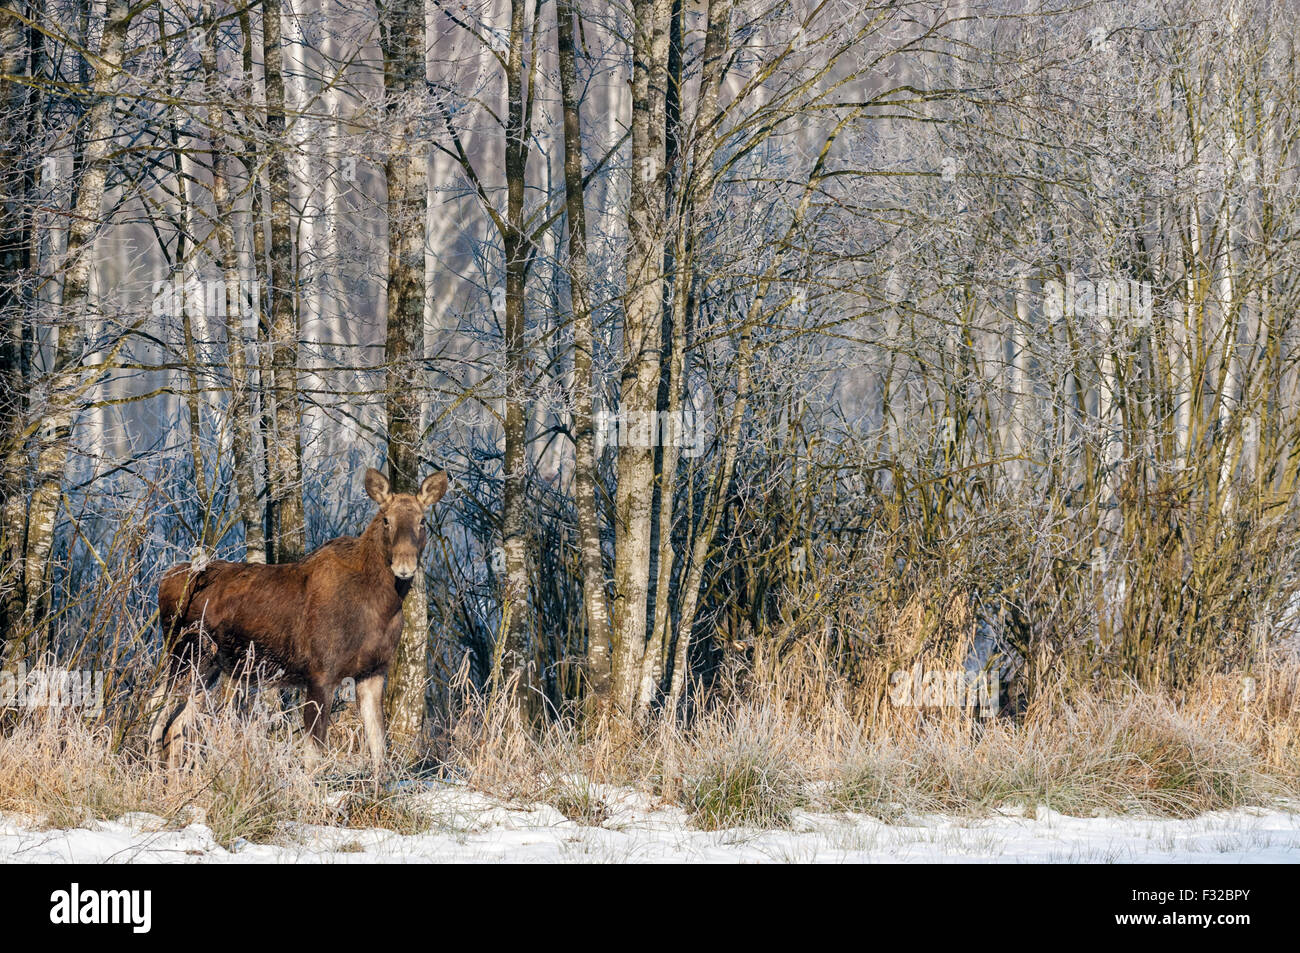 European Moose (Alces alces alces) adult female, standing on snow at edge of hoar frost covered forest, Biebrza N.P., Podlaskie Stock Photo